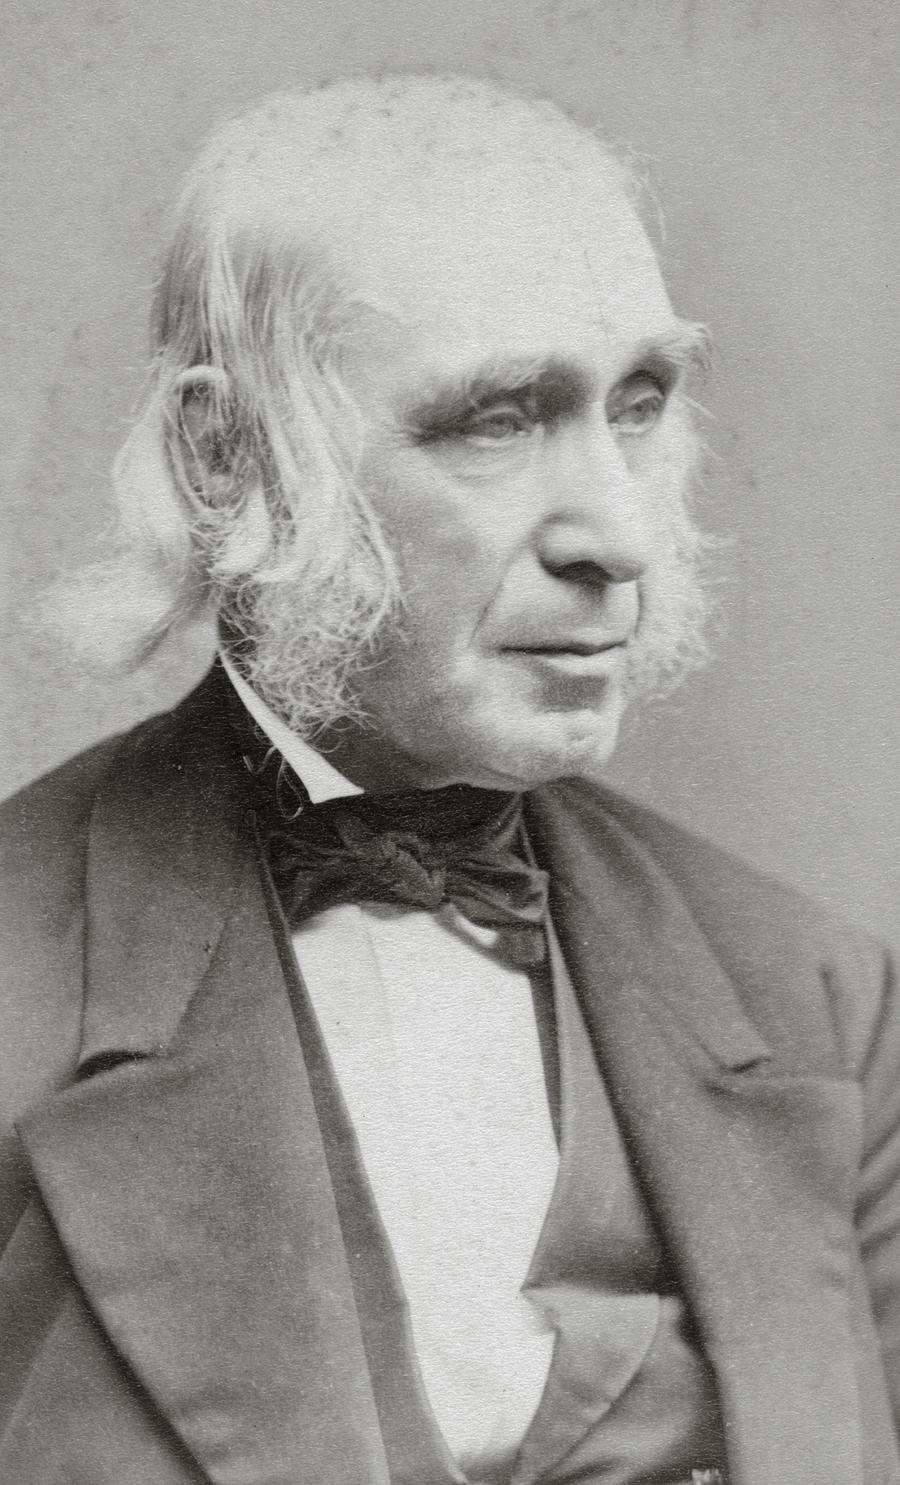 Alcott in a black suit and bow tie, facing slightly to his left